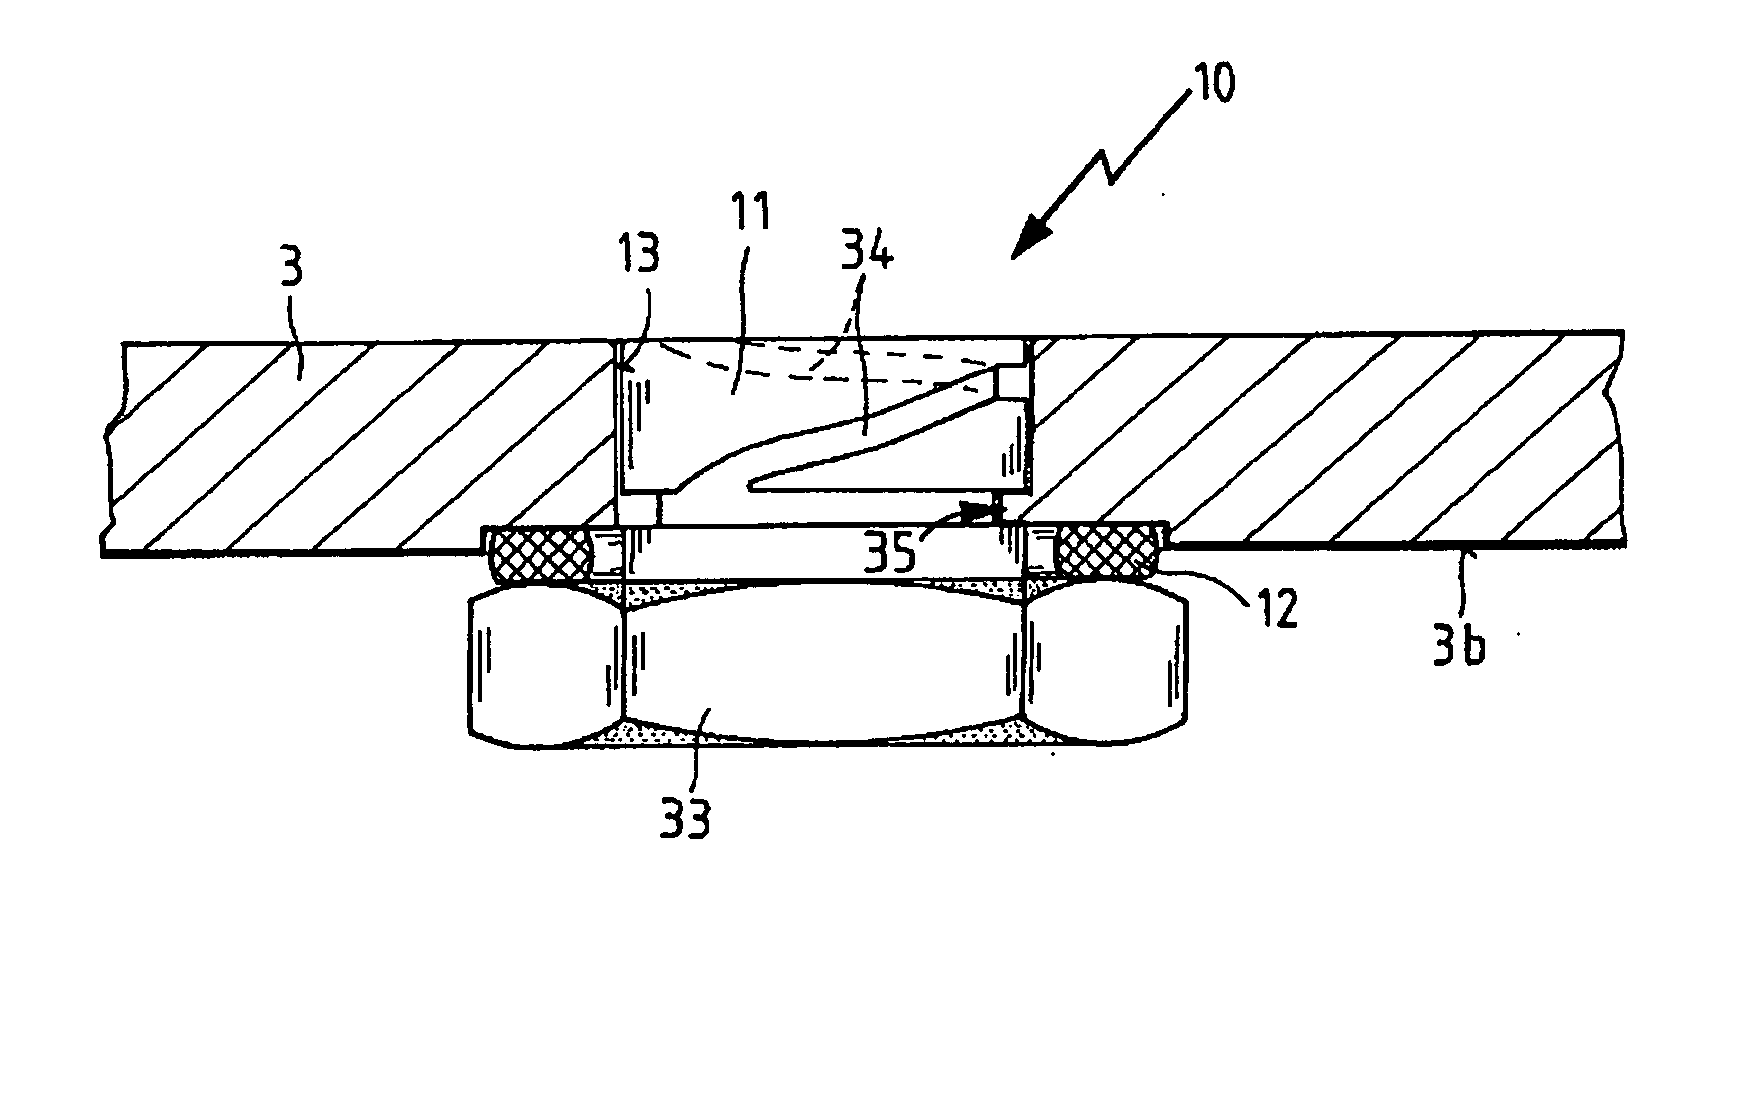 Oil pan for an internal combustion engine